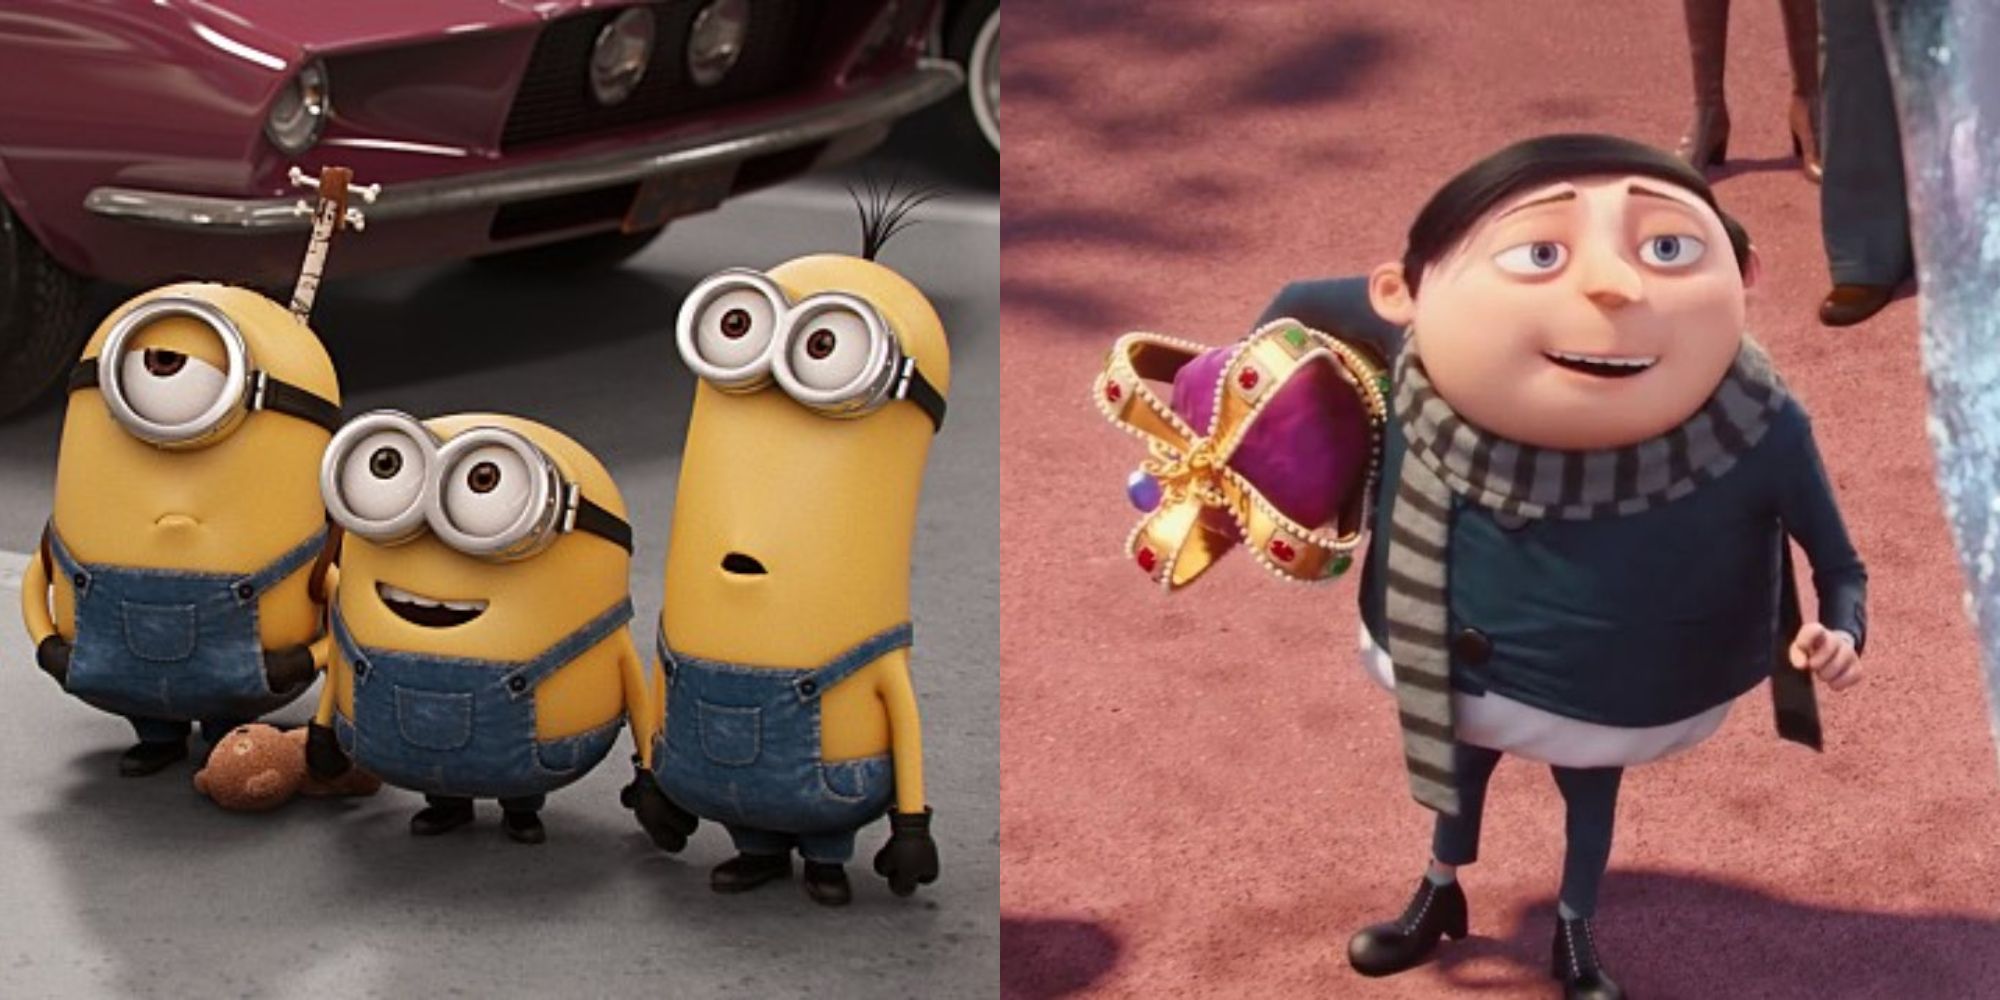 Split image showing the Minions and young Gru in Minions-